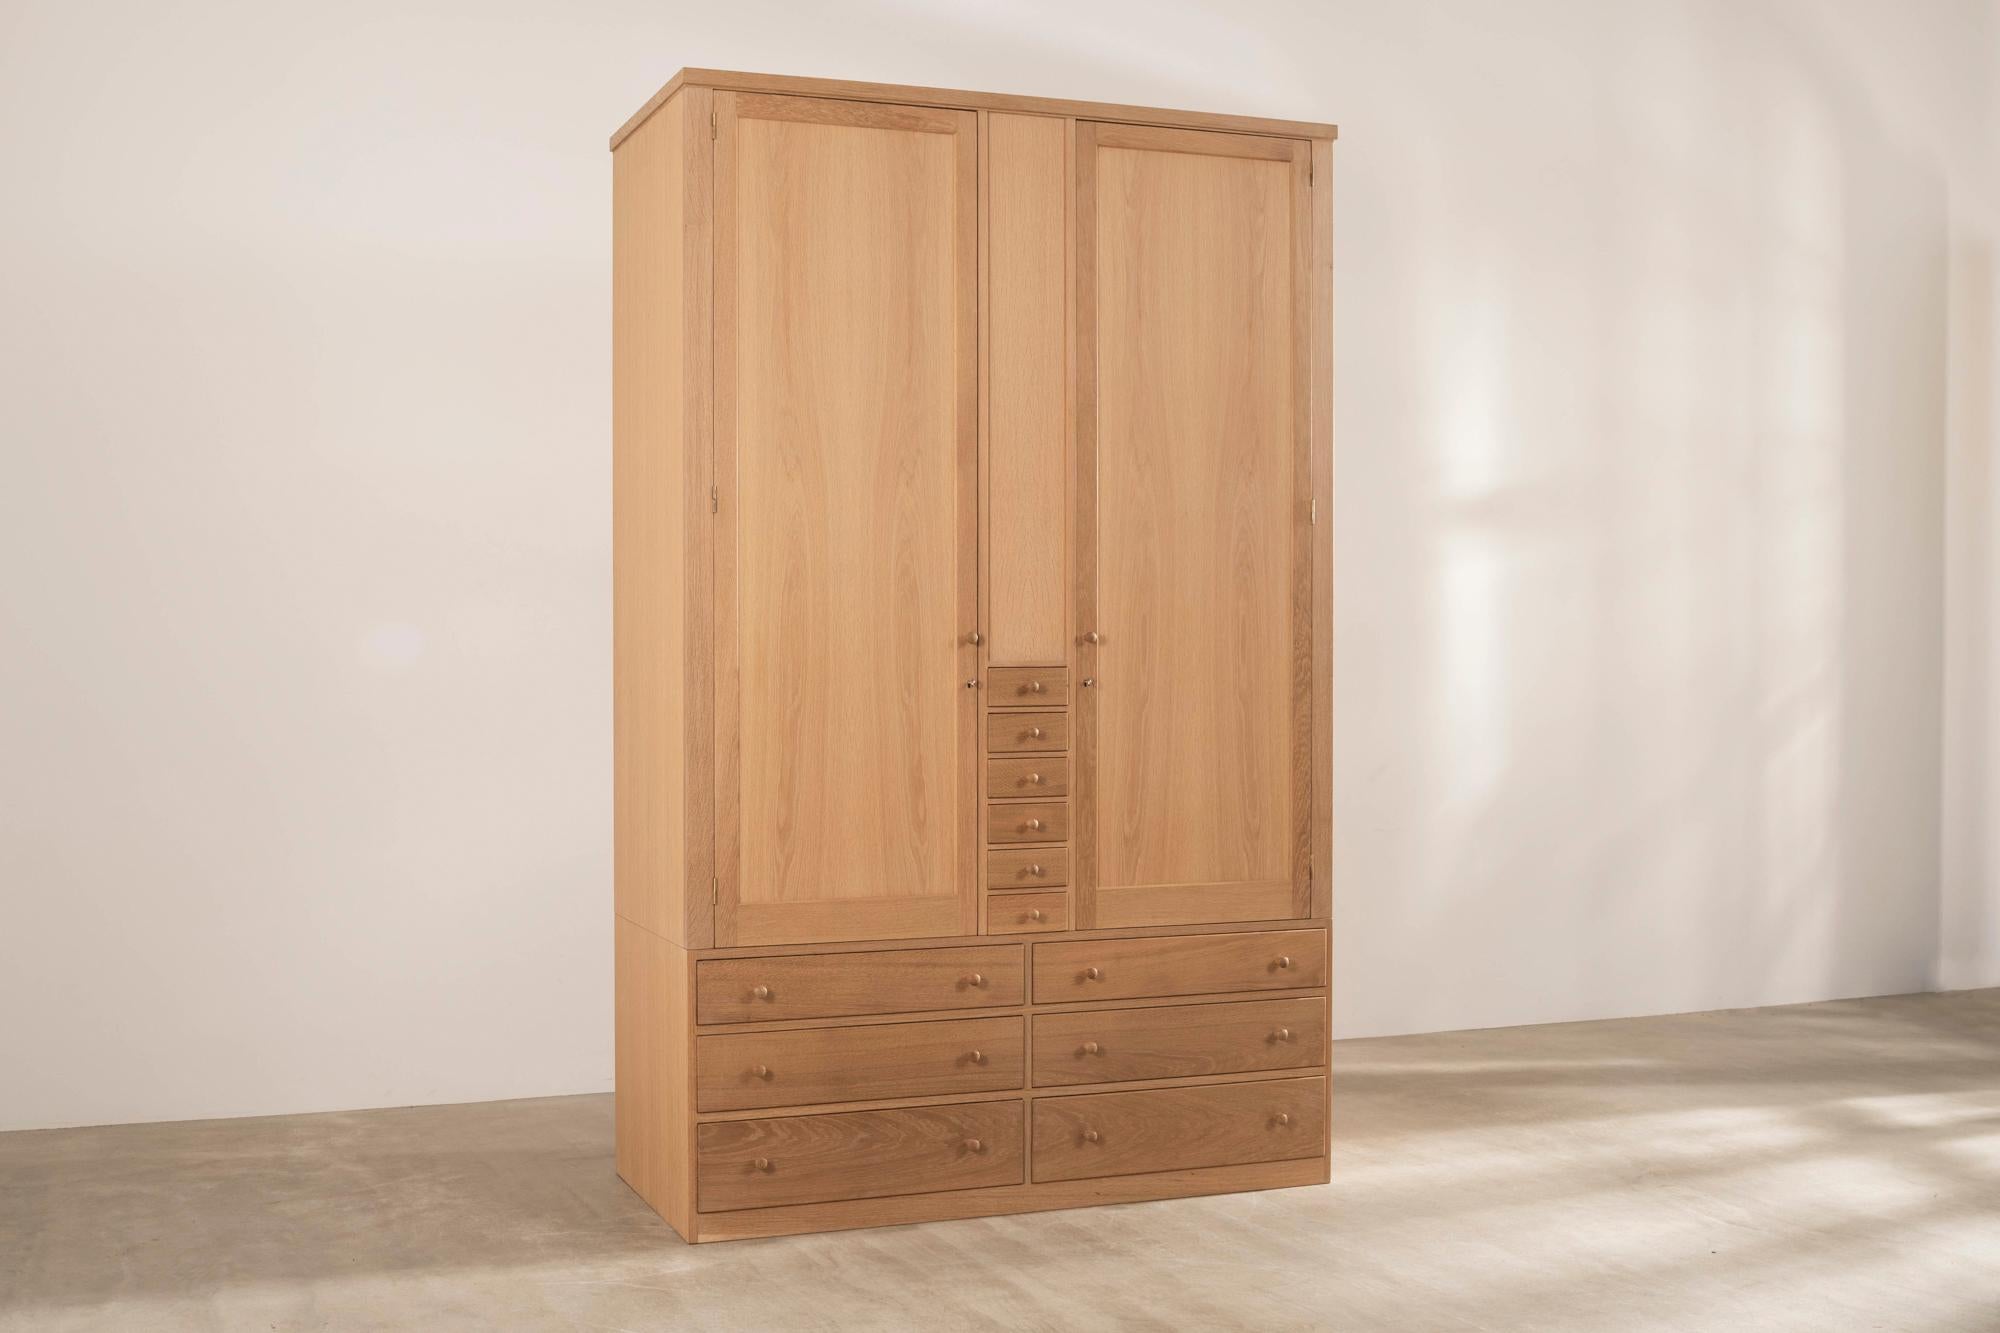 The Honor Press is a timeless design from Terence Conran with sleek lines, beautiful dovetailed drawers and hand turned knobs. 

It is made by hand at Benchmark’s Berkshire workshops from European oak, and comes with six large and six small